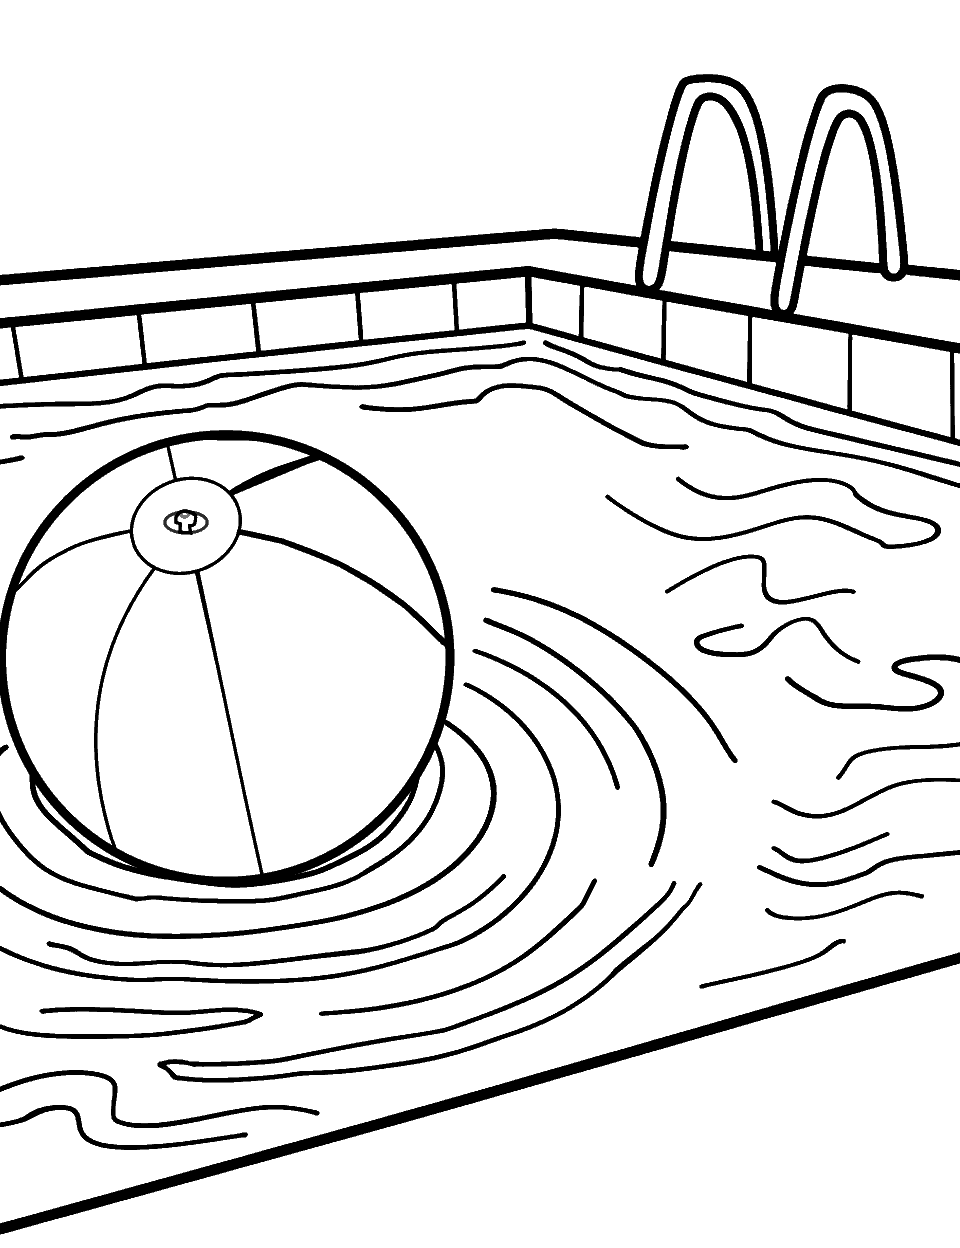 Beach Ball Fun Coloring Page - A beach ball floating in a pool.